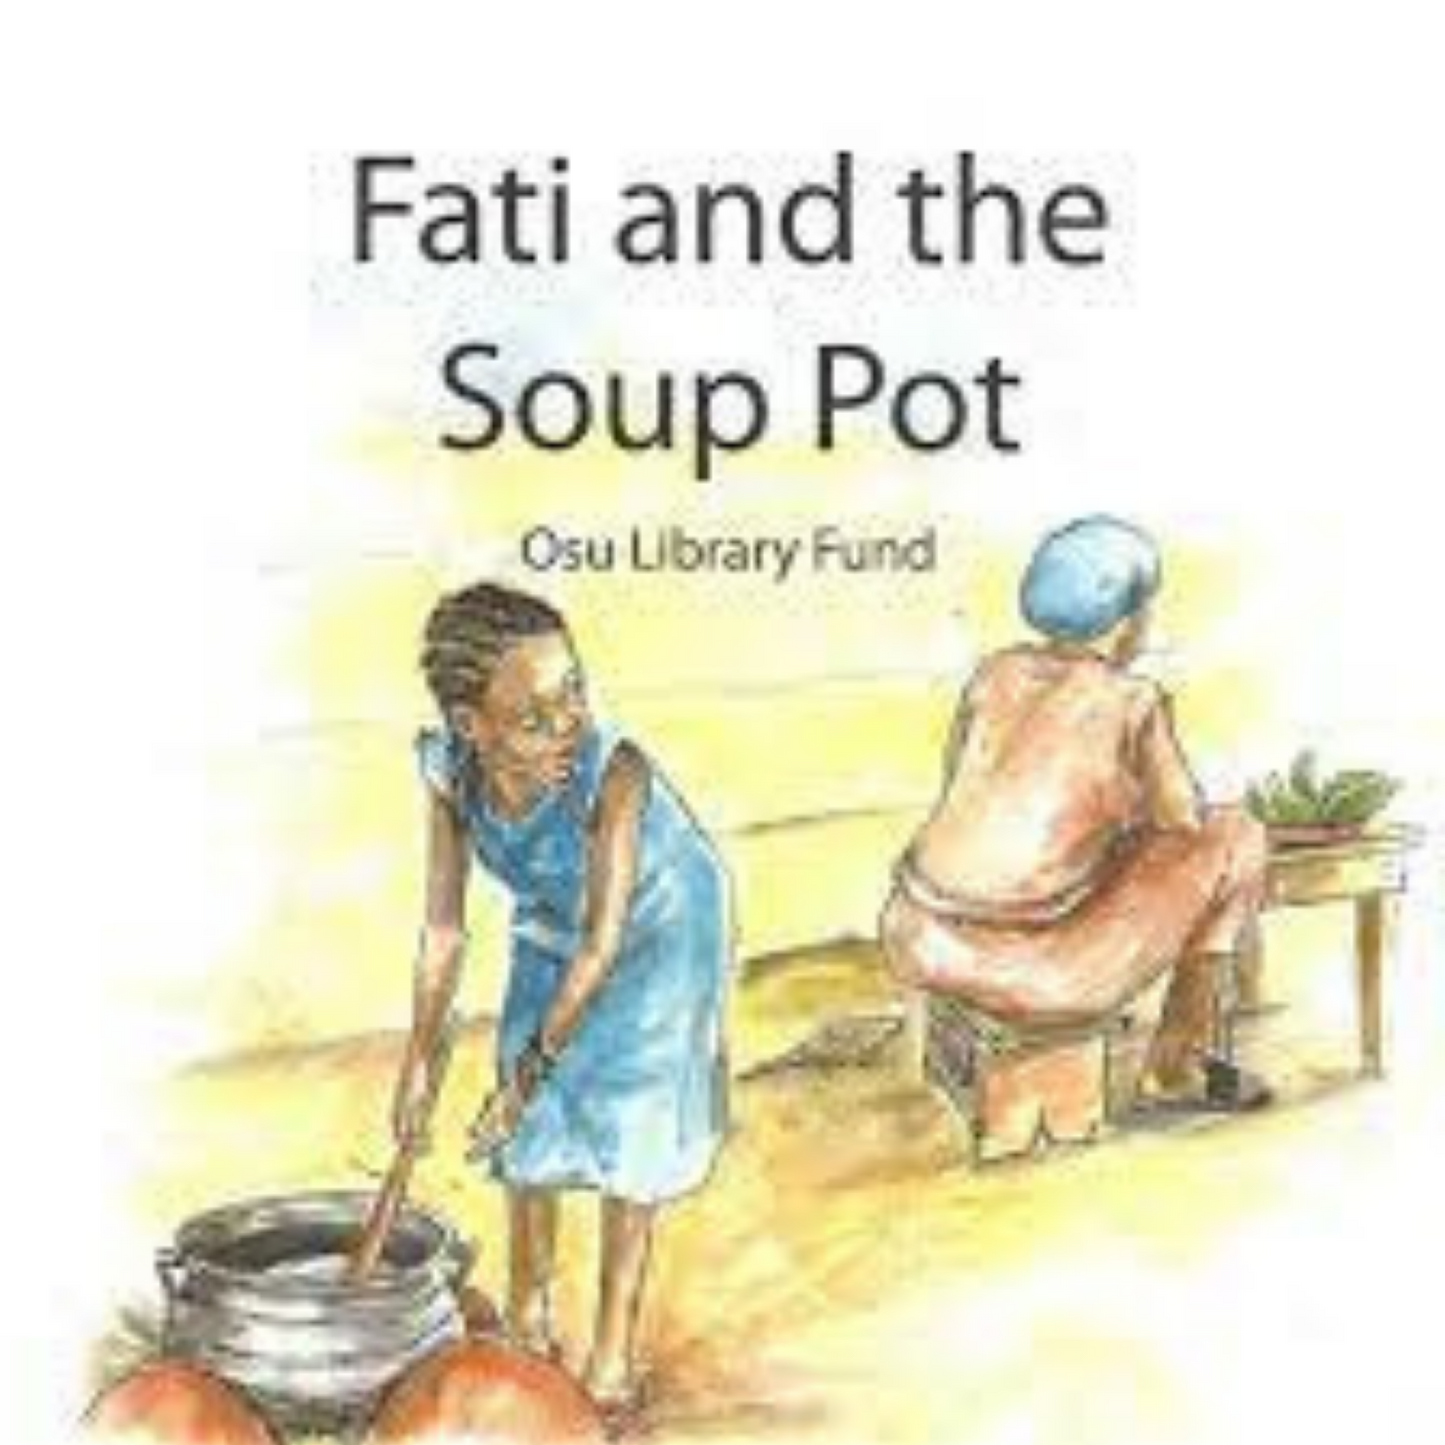 Fati and the Soup Pot